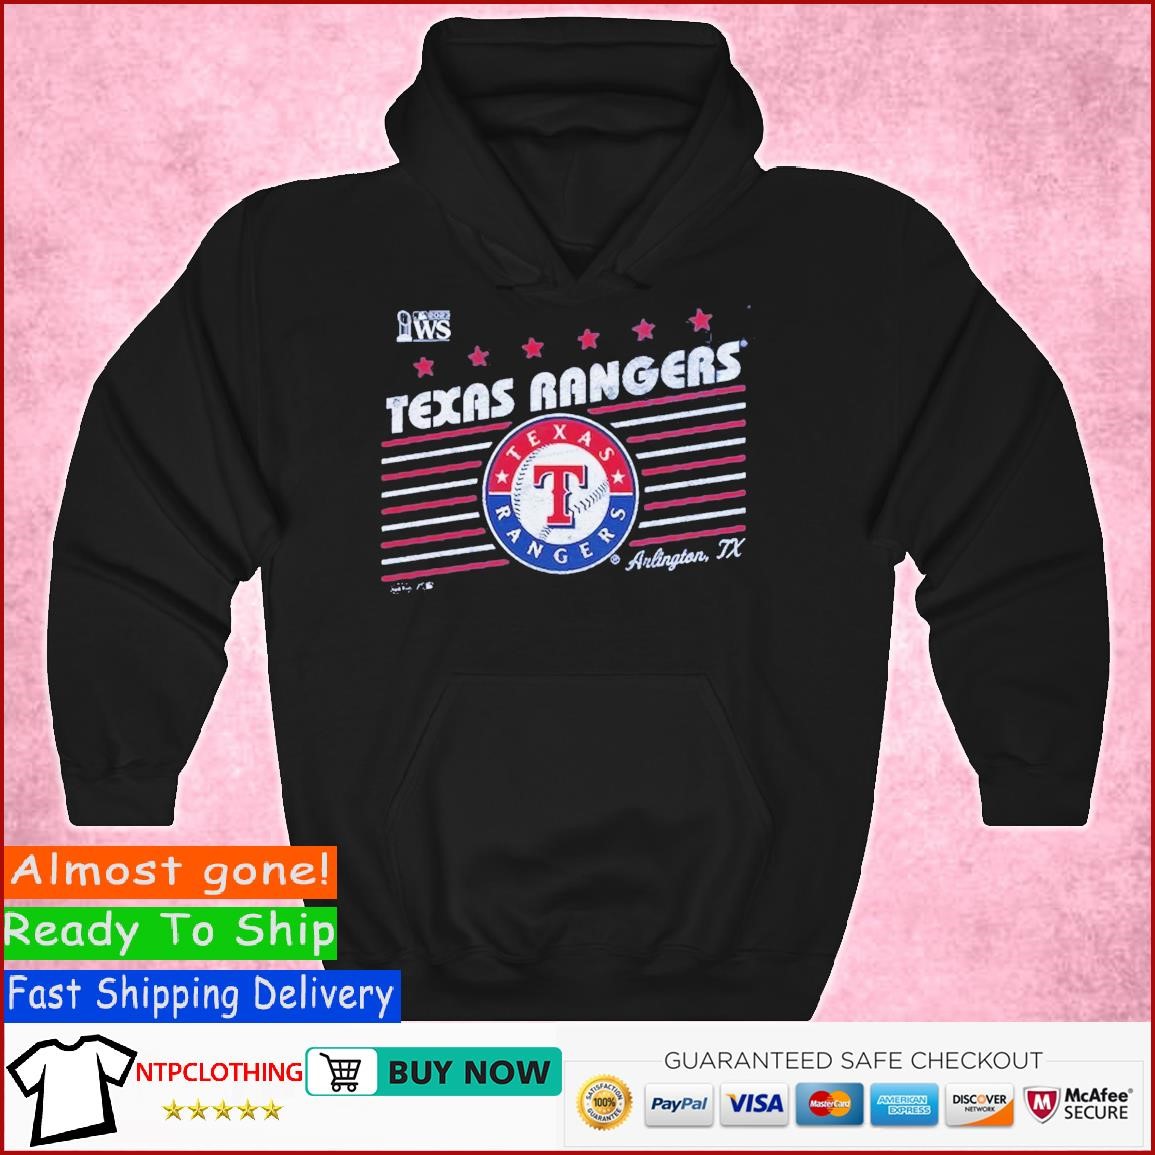 Men's Majestic Royal/Red Texas Rangers Authentic Collection On